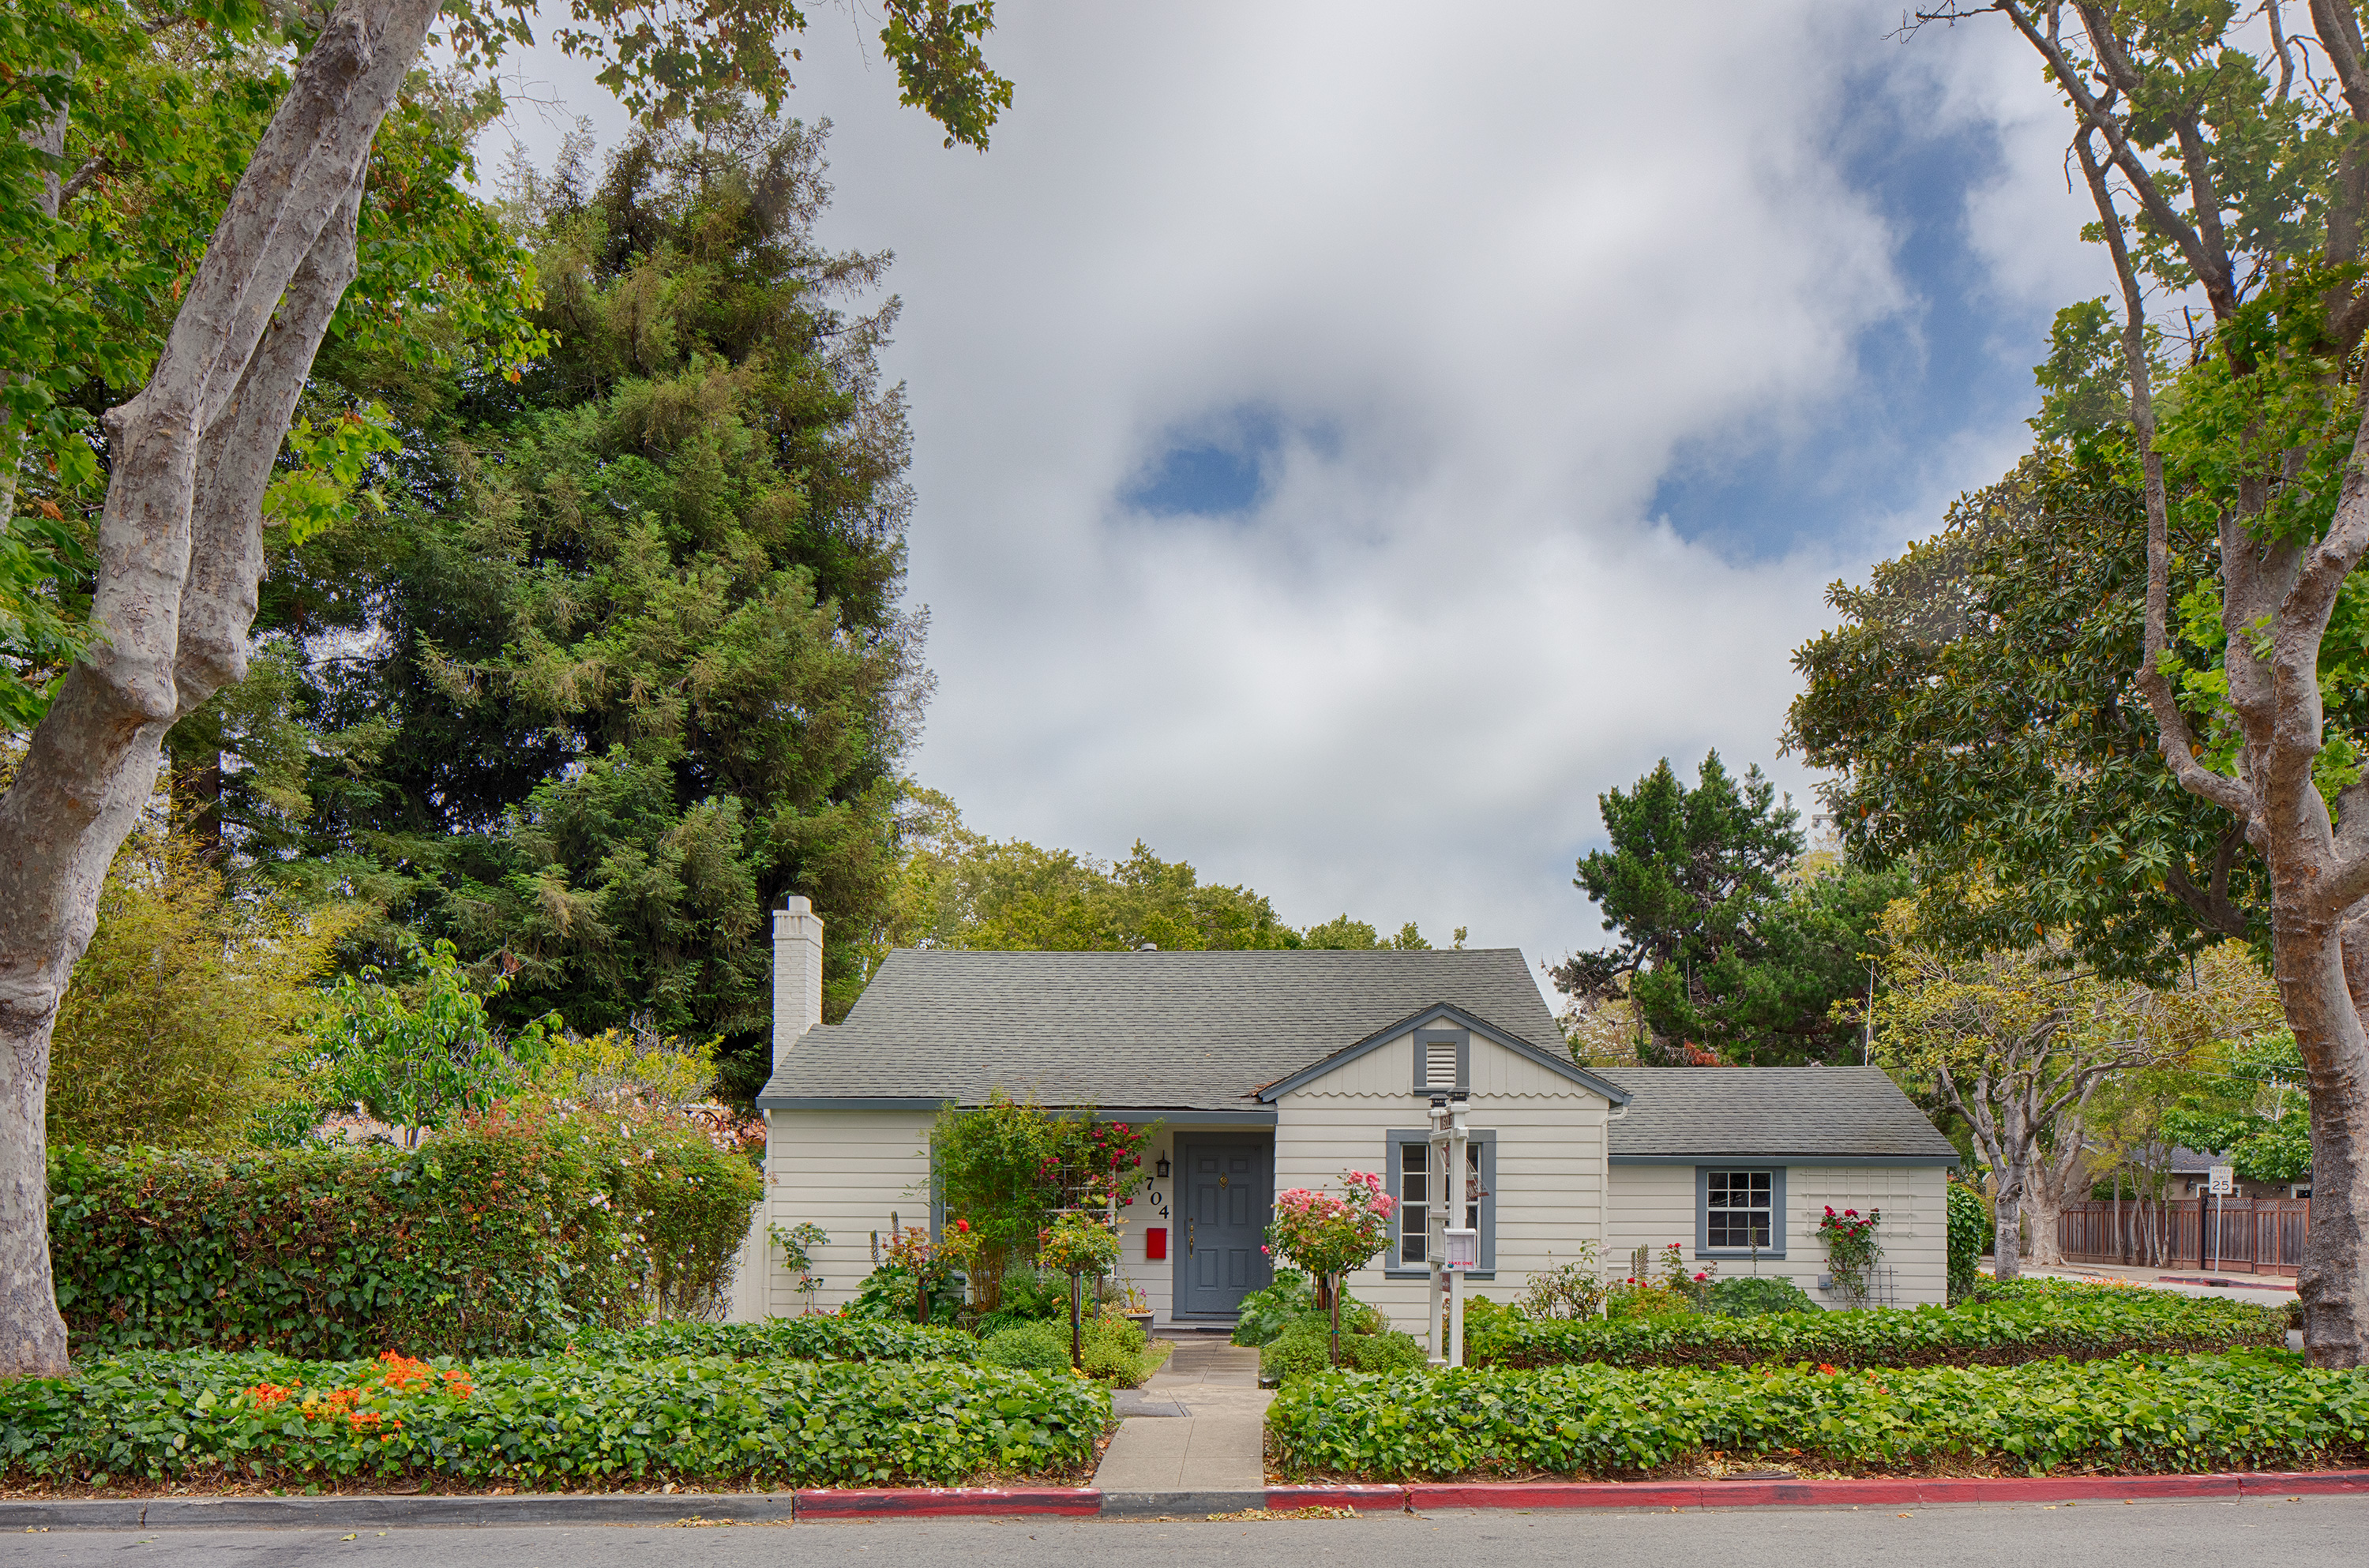 704 Winchester Dr, Burlingame 94010 - Winchester Dr 704 